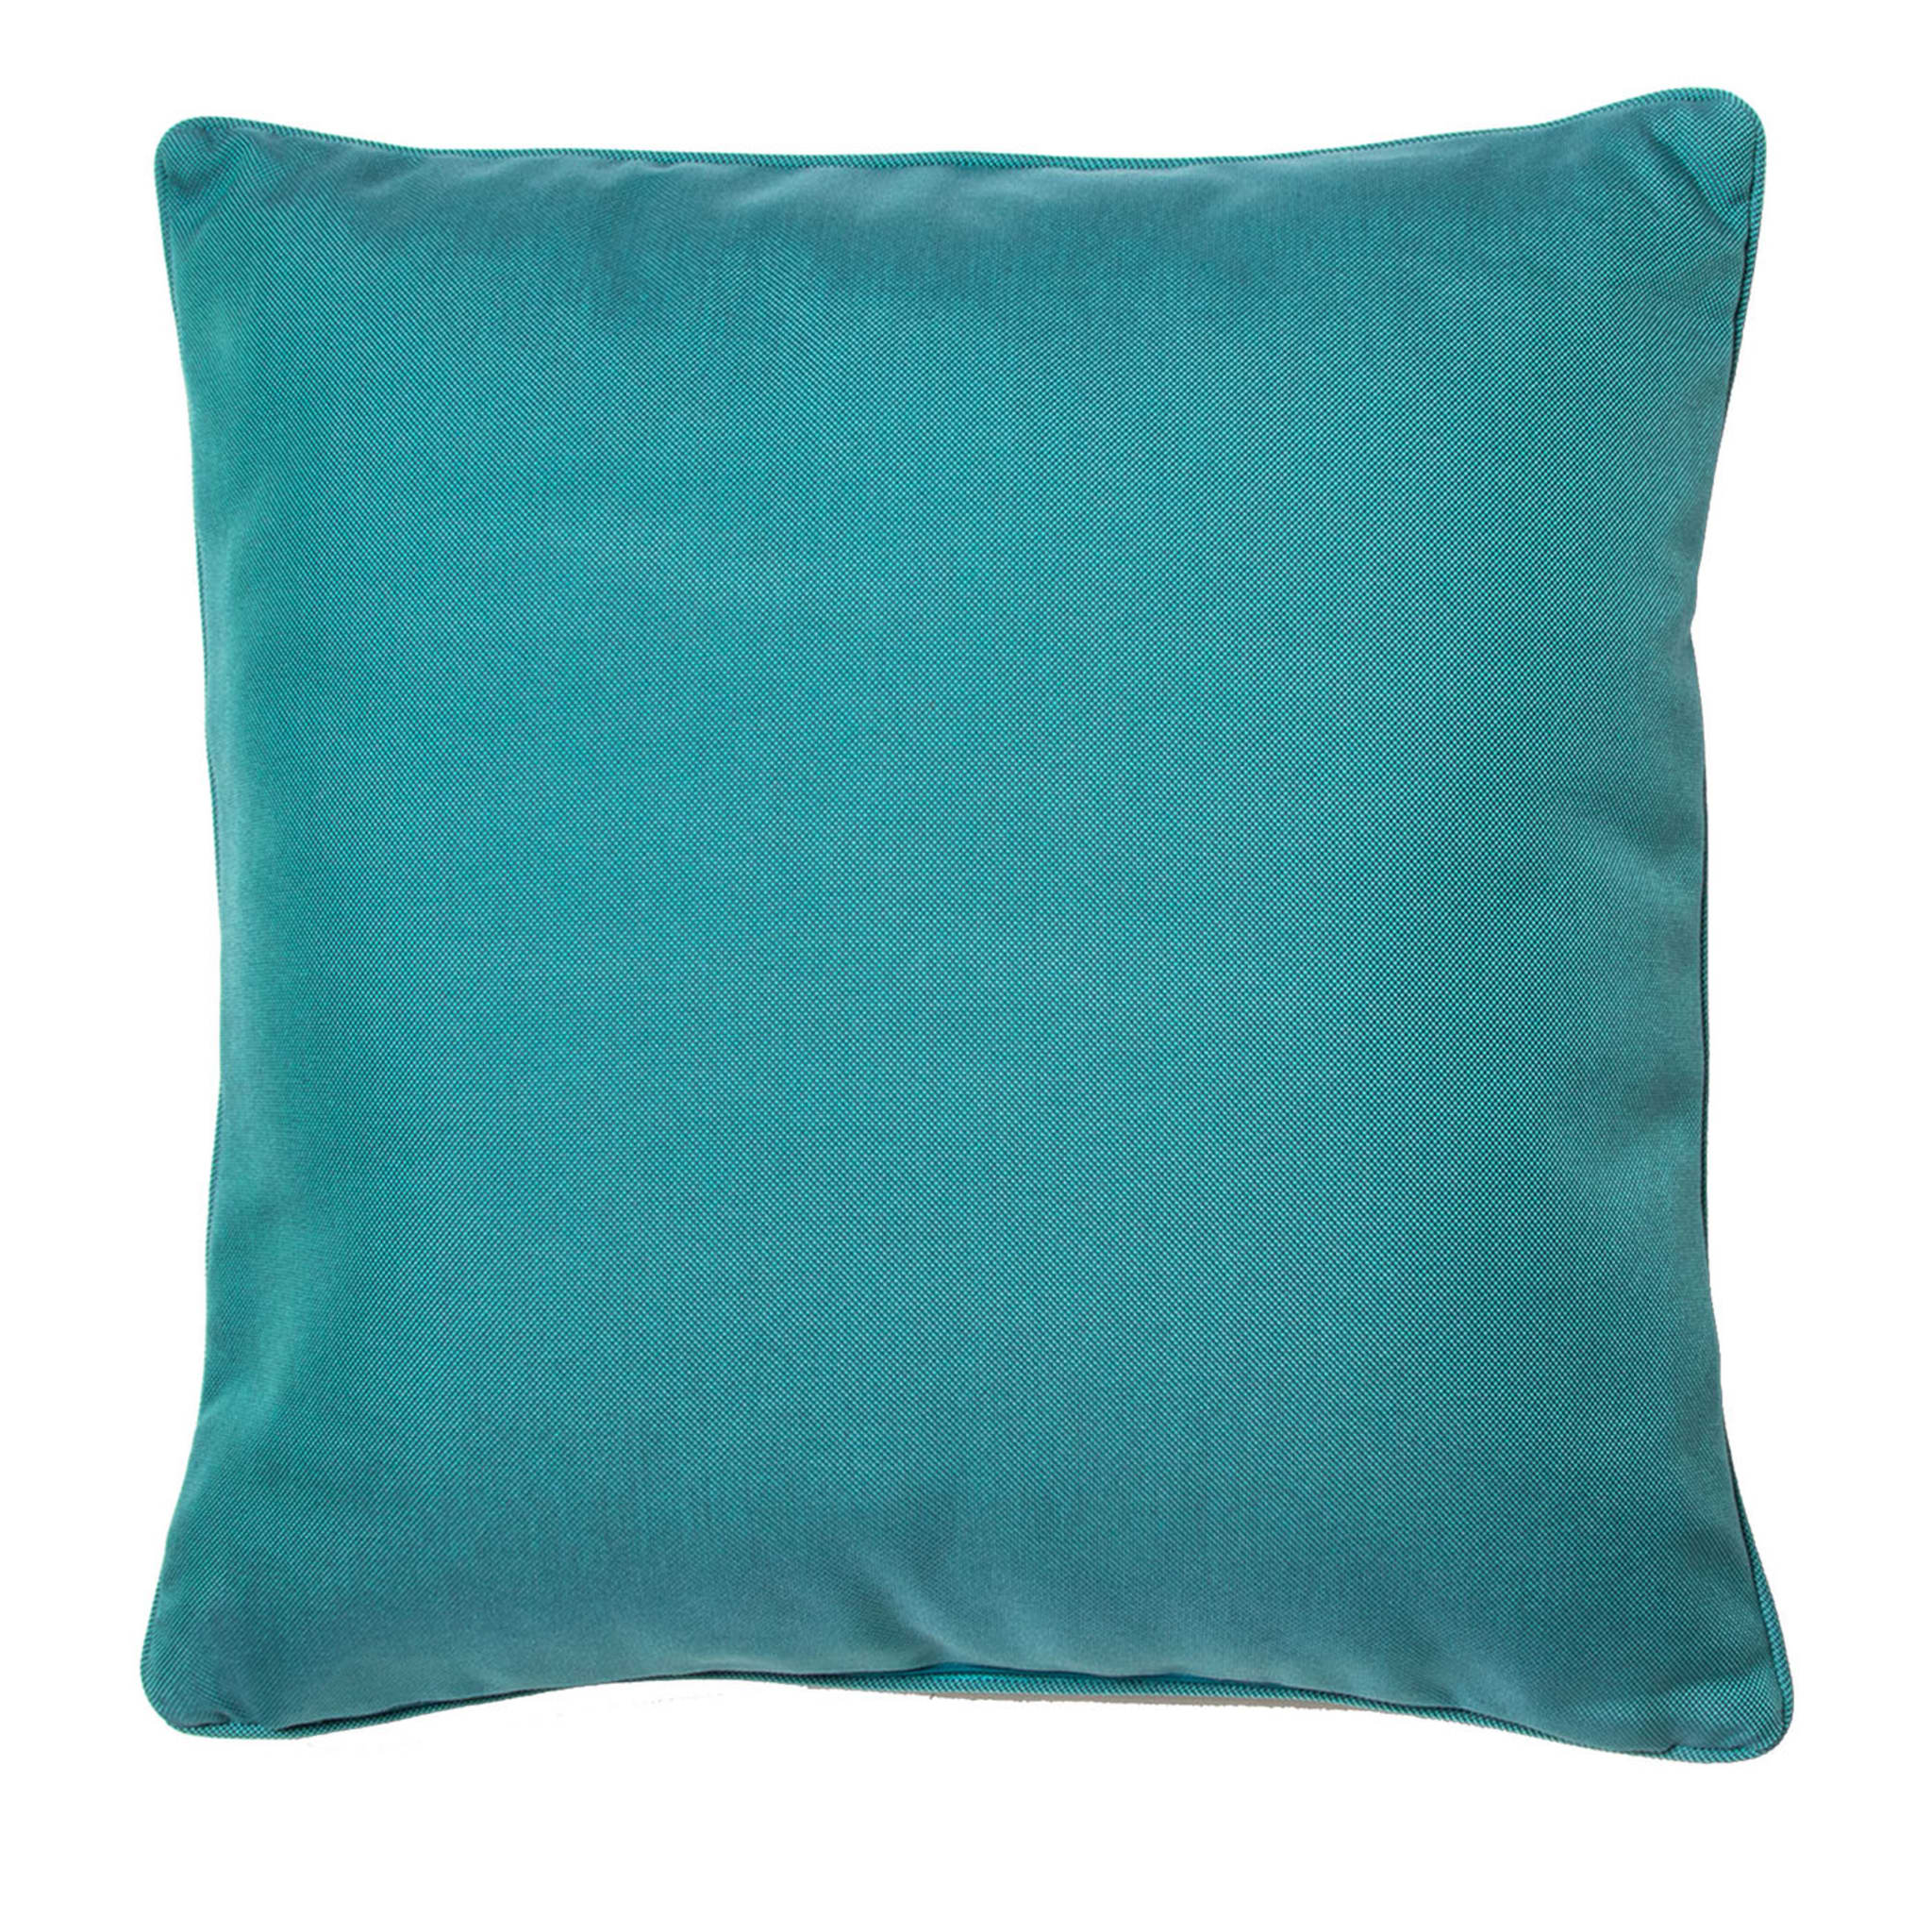 Mia Spring Waterproof Large Cushion by Luciana Gomez - Alternative view 1